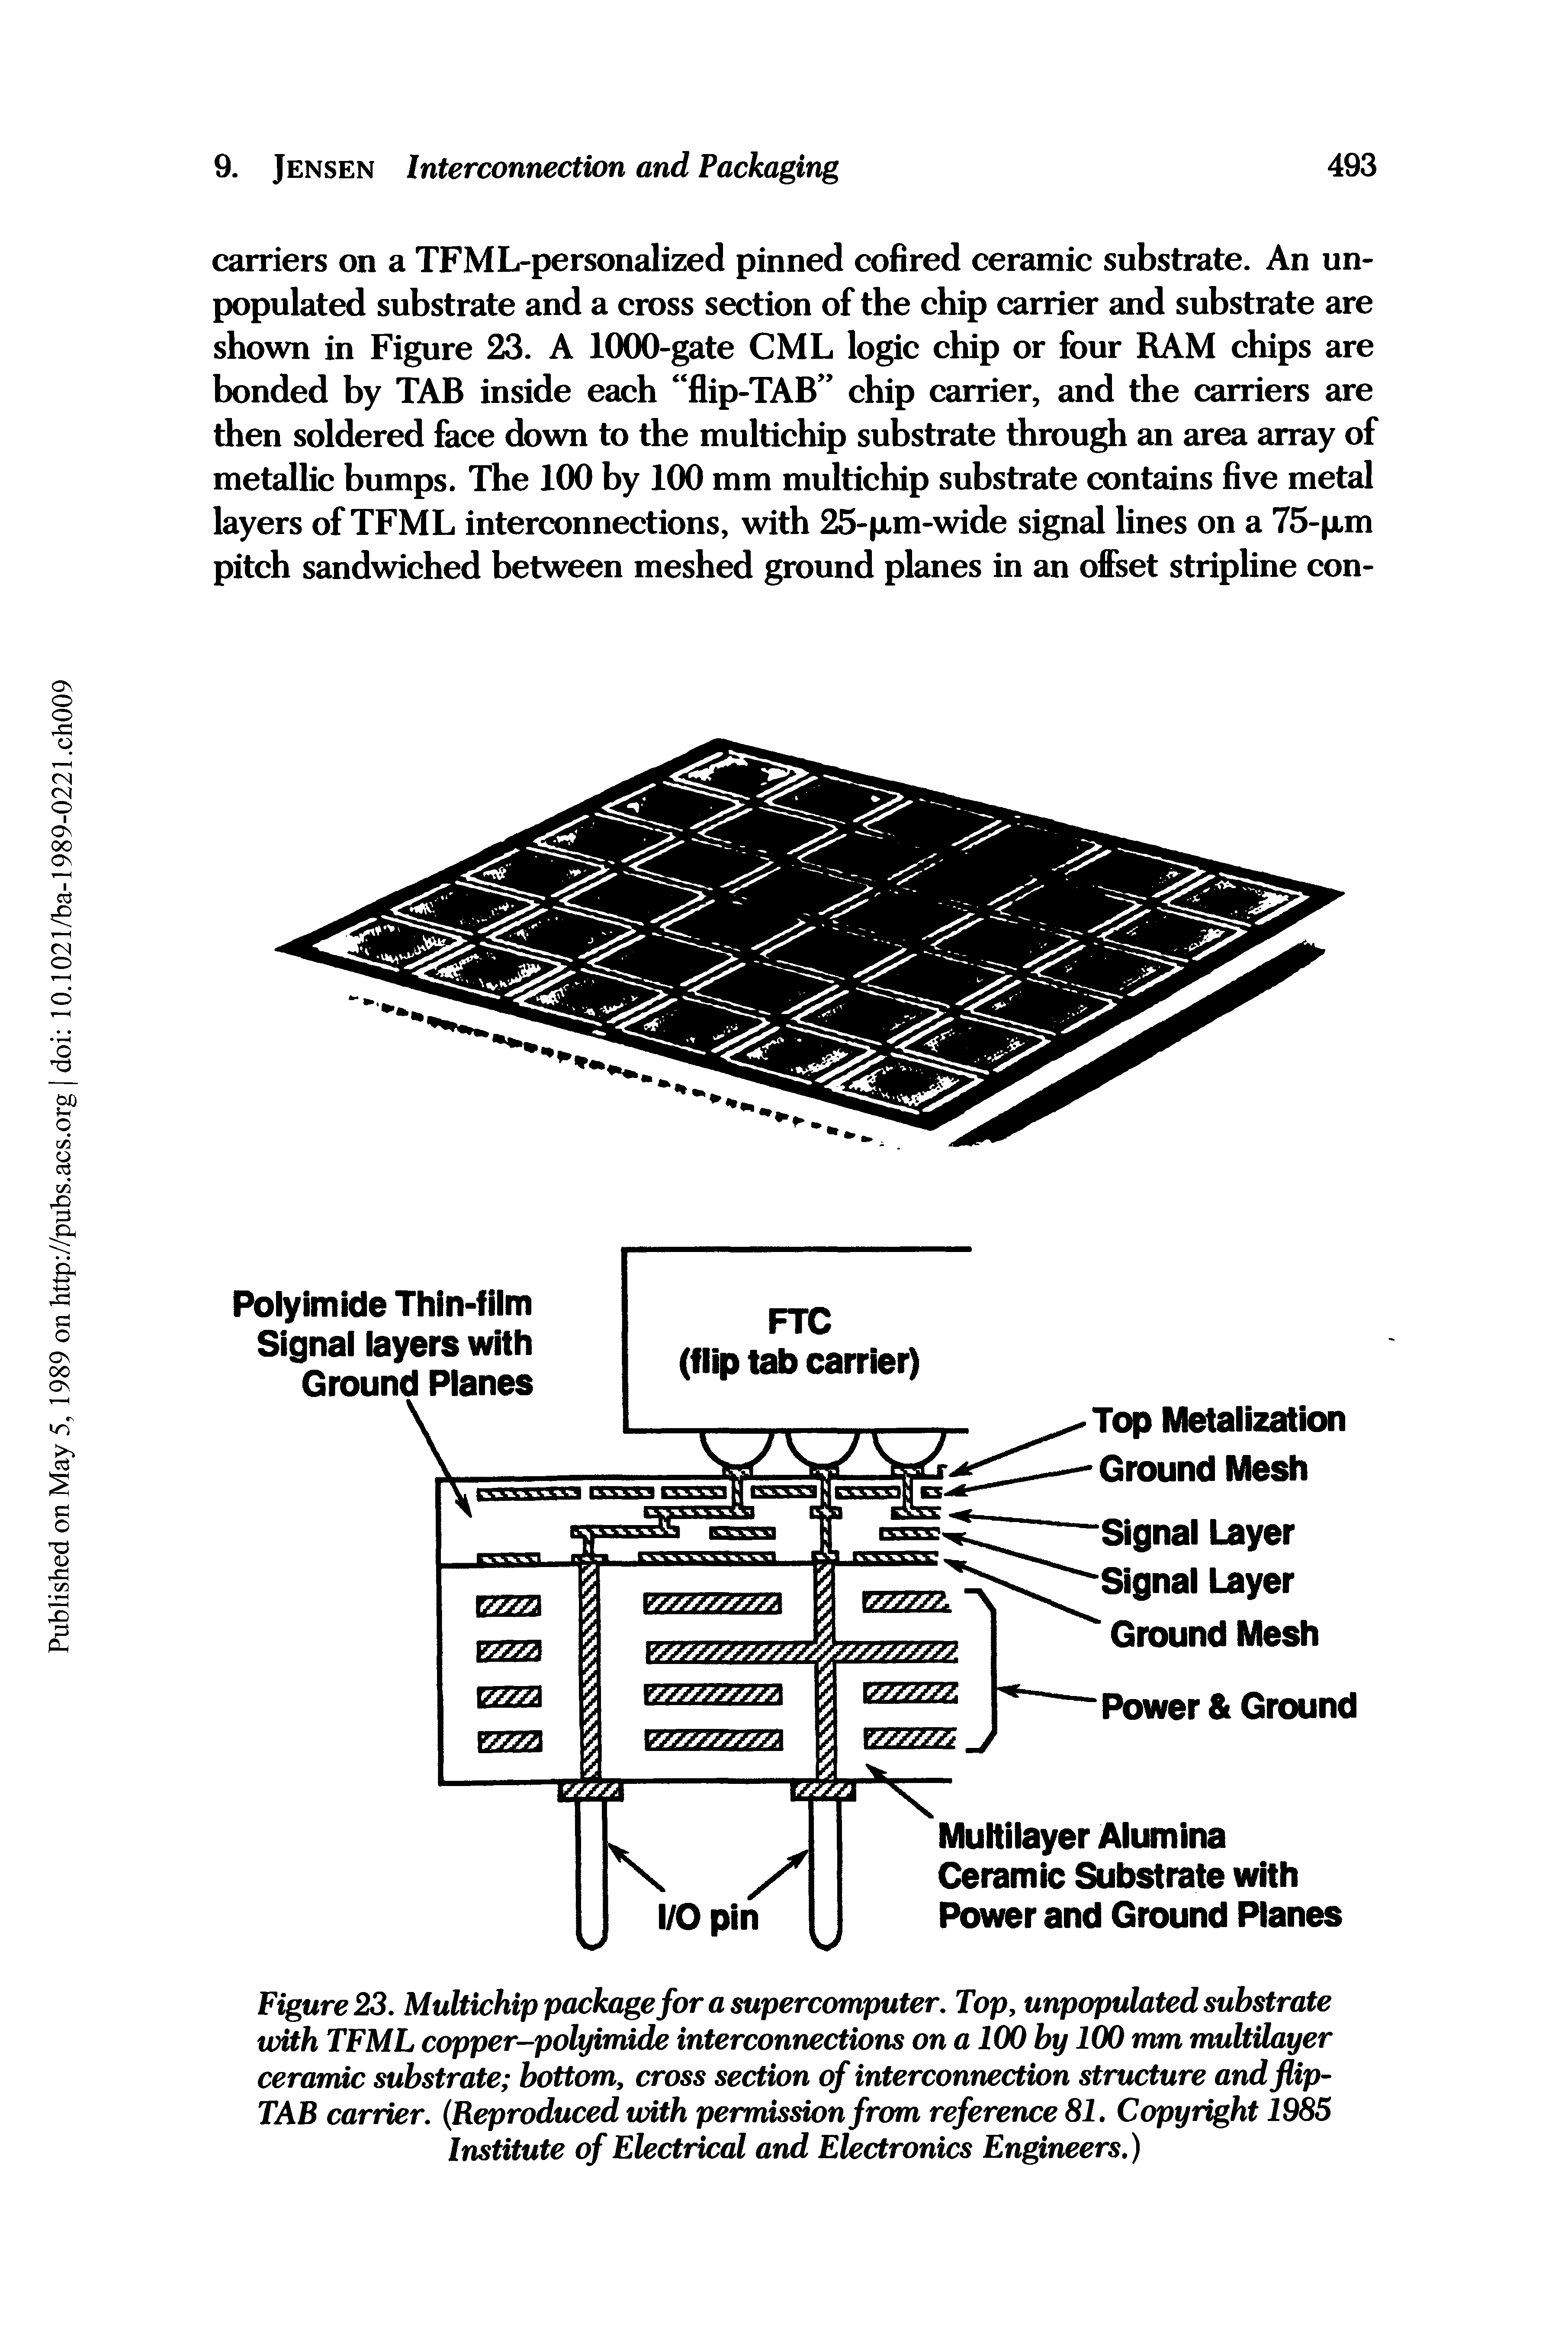 Figure 23. Multichip package for a supercomputer. Top, unpopulated substrate with TFML copper-polyimide interconnections on a 100 by 100 mm multilayer ceramic substrate bottom, cross section of interconnection structure and flip-TAB carrier. (Reproduced with permission from reference 81. Copyright 1985 Institute of Electrical and Electronics Engineers.)...